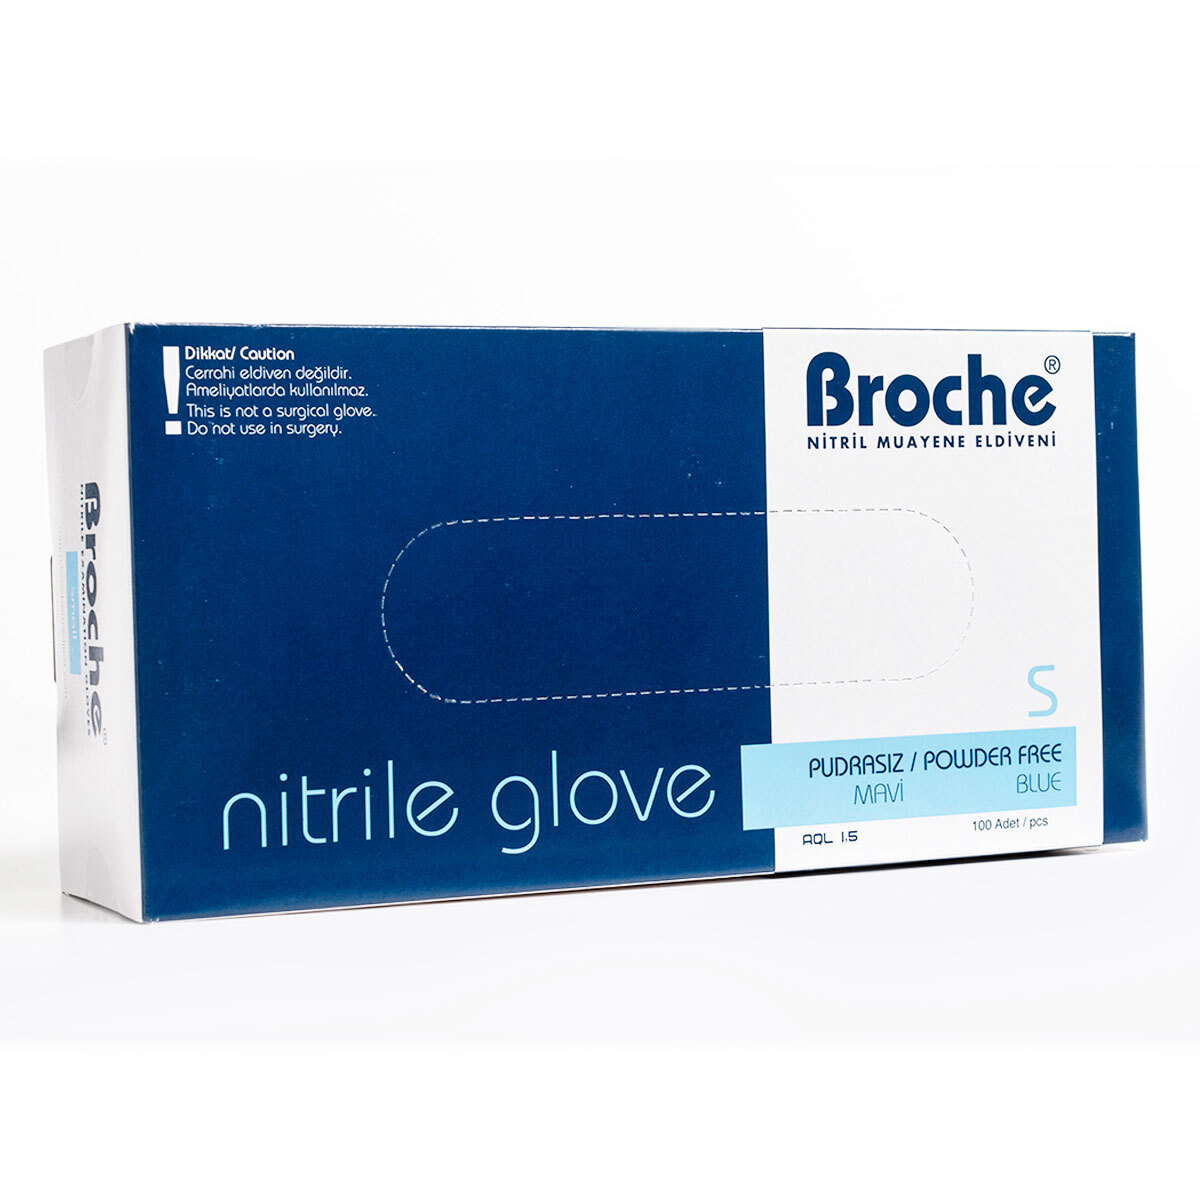 Broche Nitrile Gloves - Small, 100 Pack Top View